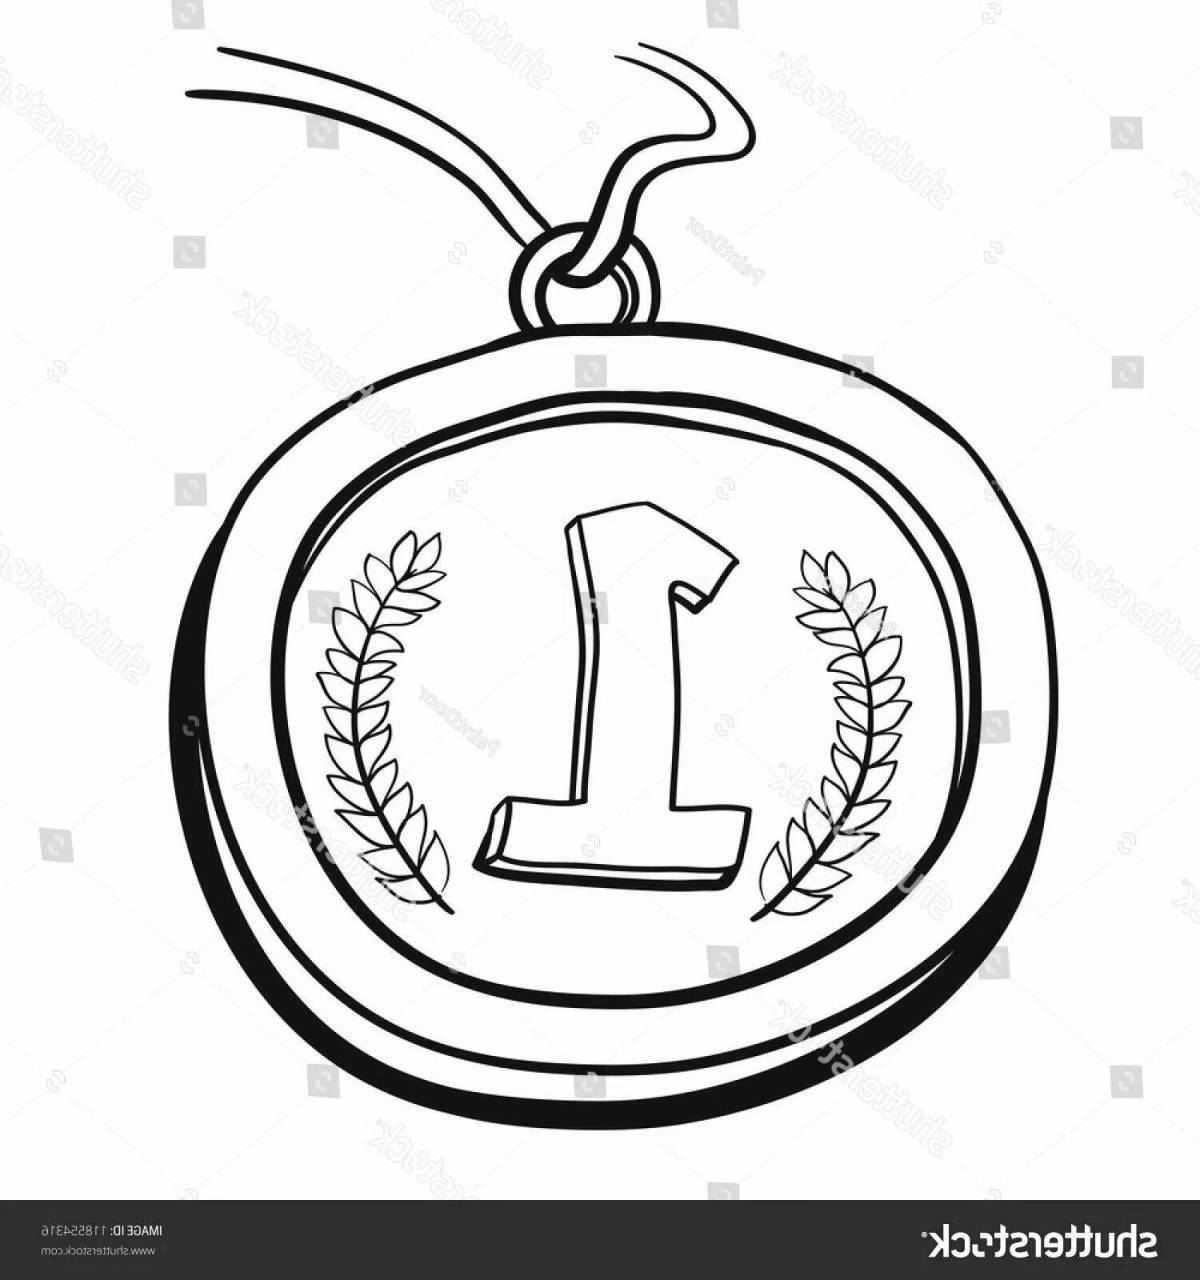 Exquisite medal pattern coloring page